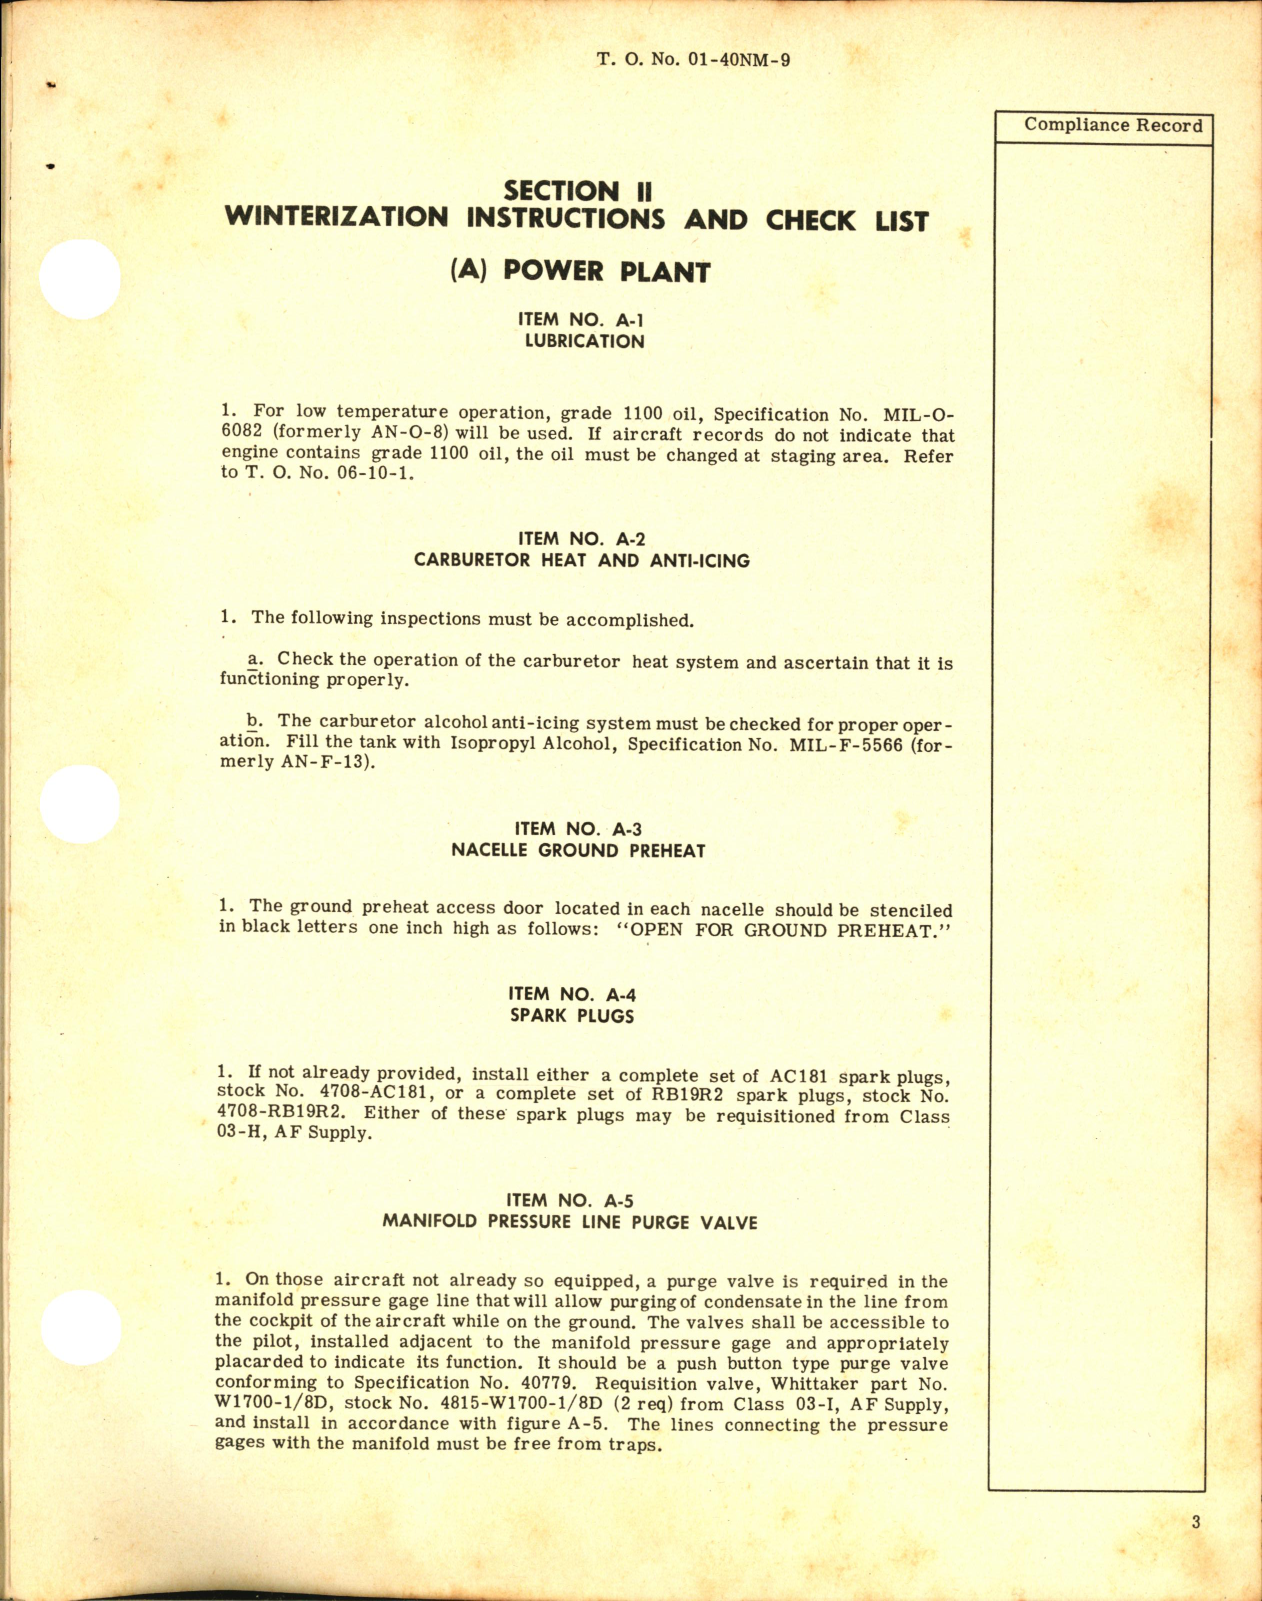 Sample page 5 from AirCorps Library document: Winterization Instructions and Check List for C-54D, E, and G Aircraft